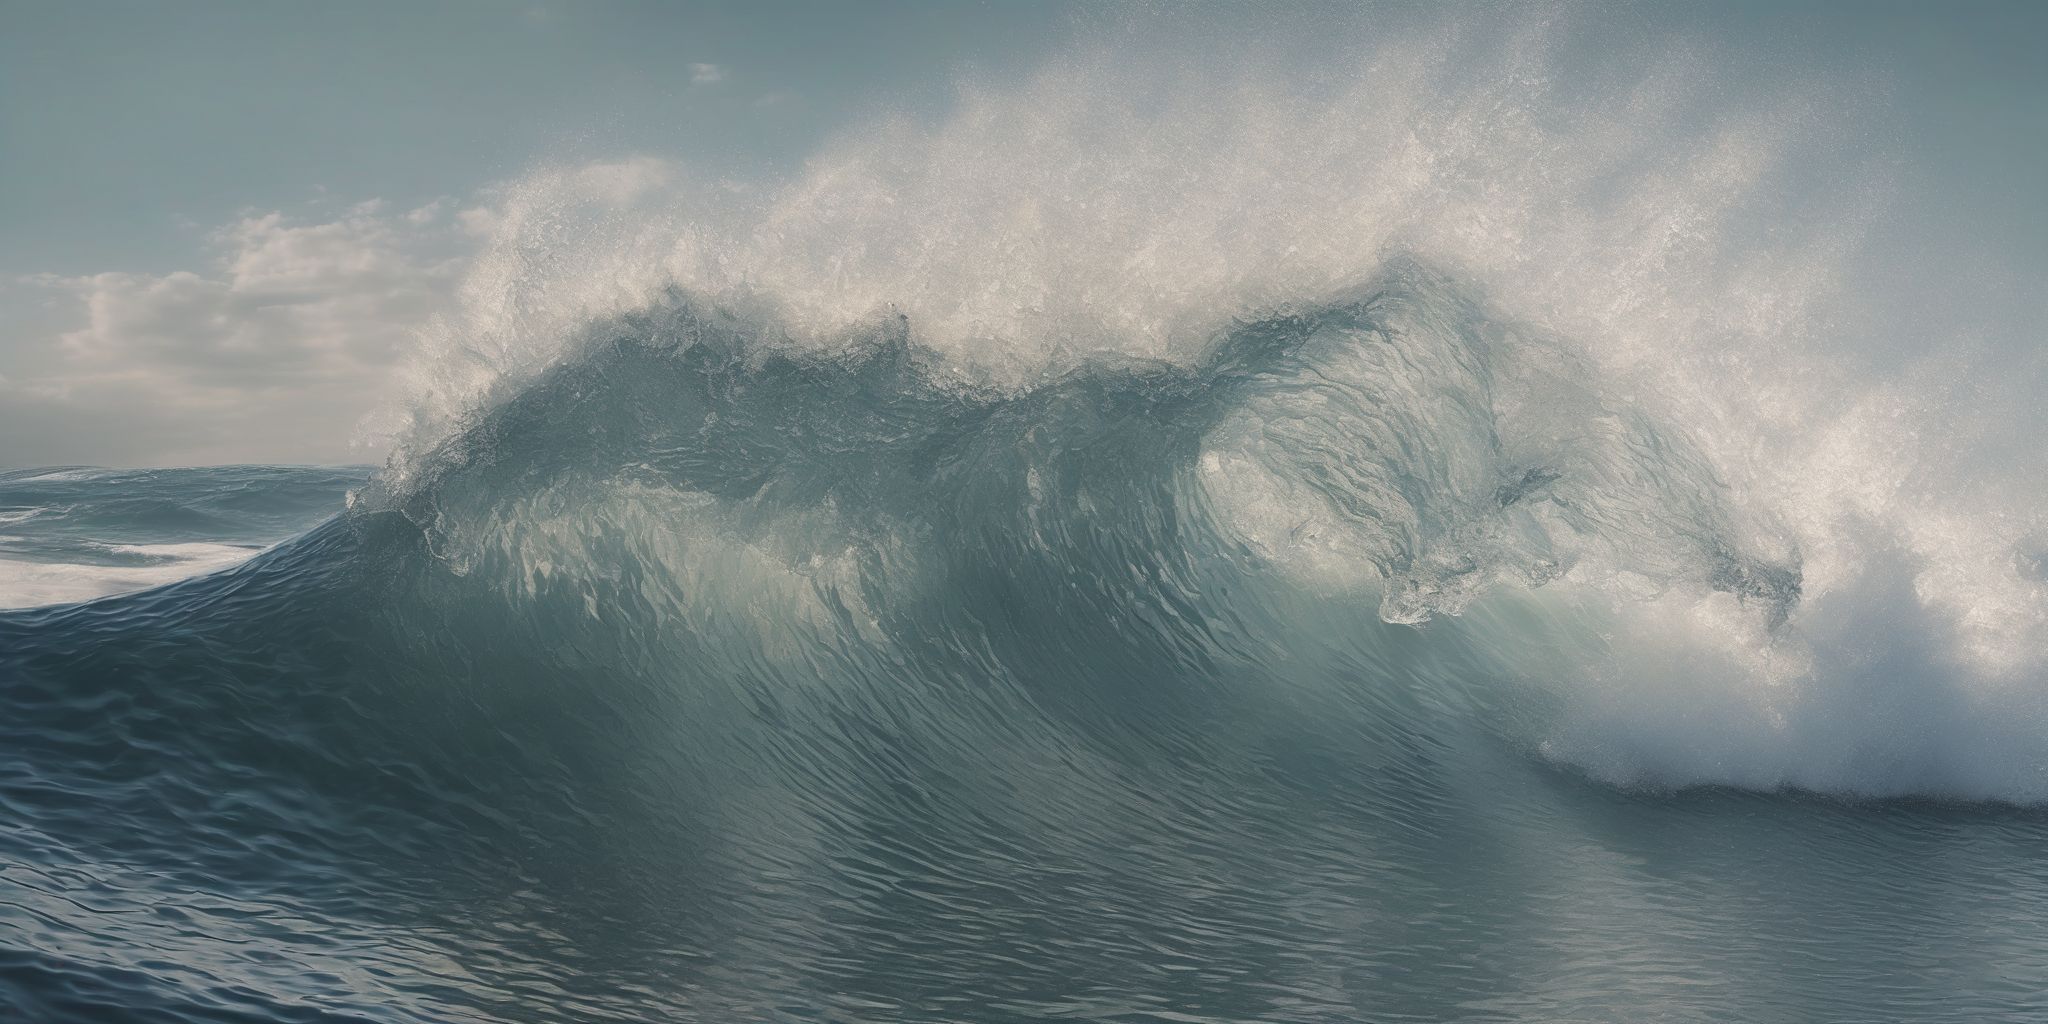 Digital wave  in realistic, photographic style